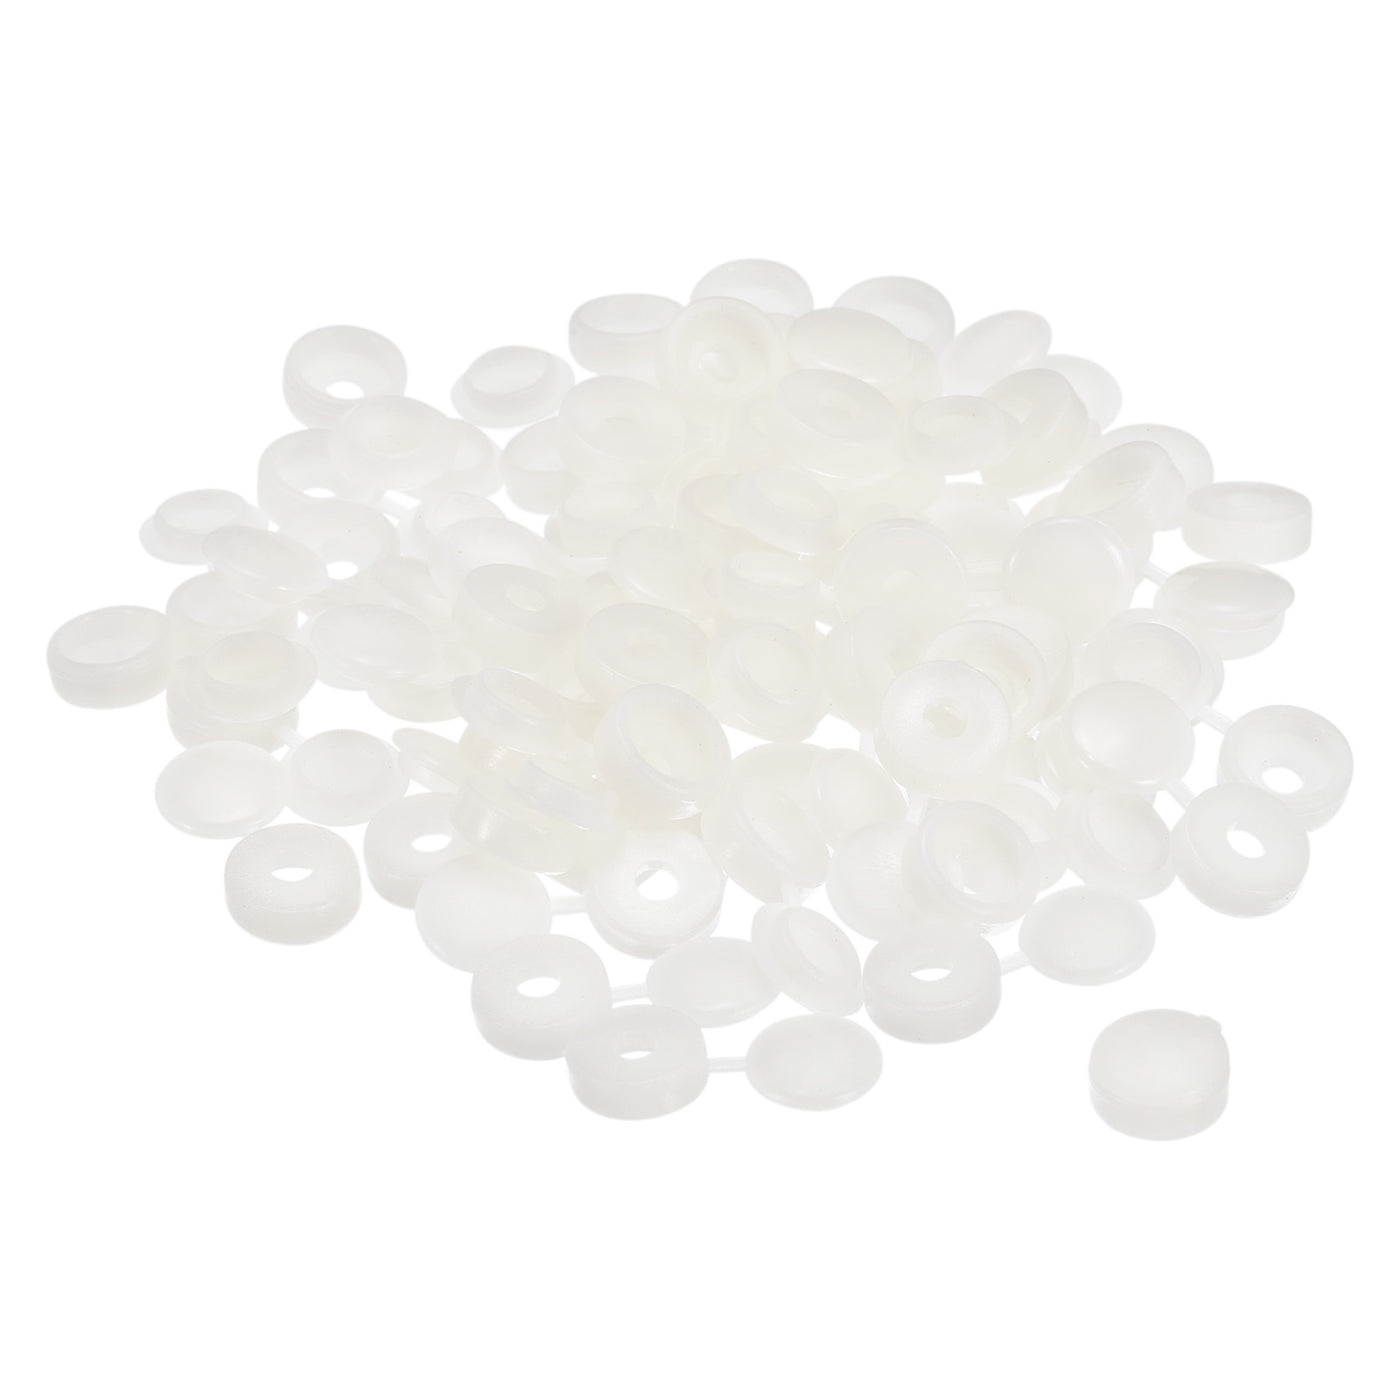 uxcell Uxcell 100Pcs 3mm Hinged Screw Cover Caps Plastic Fold Screw Snap Covers, Warm White